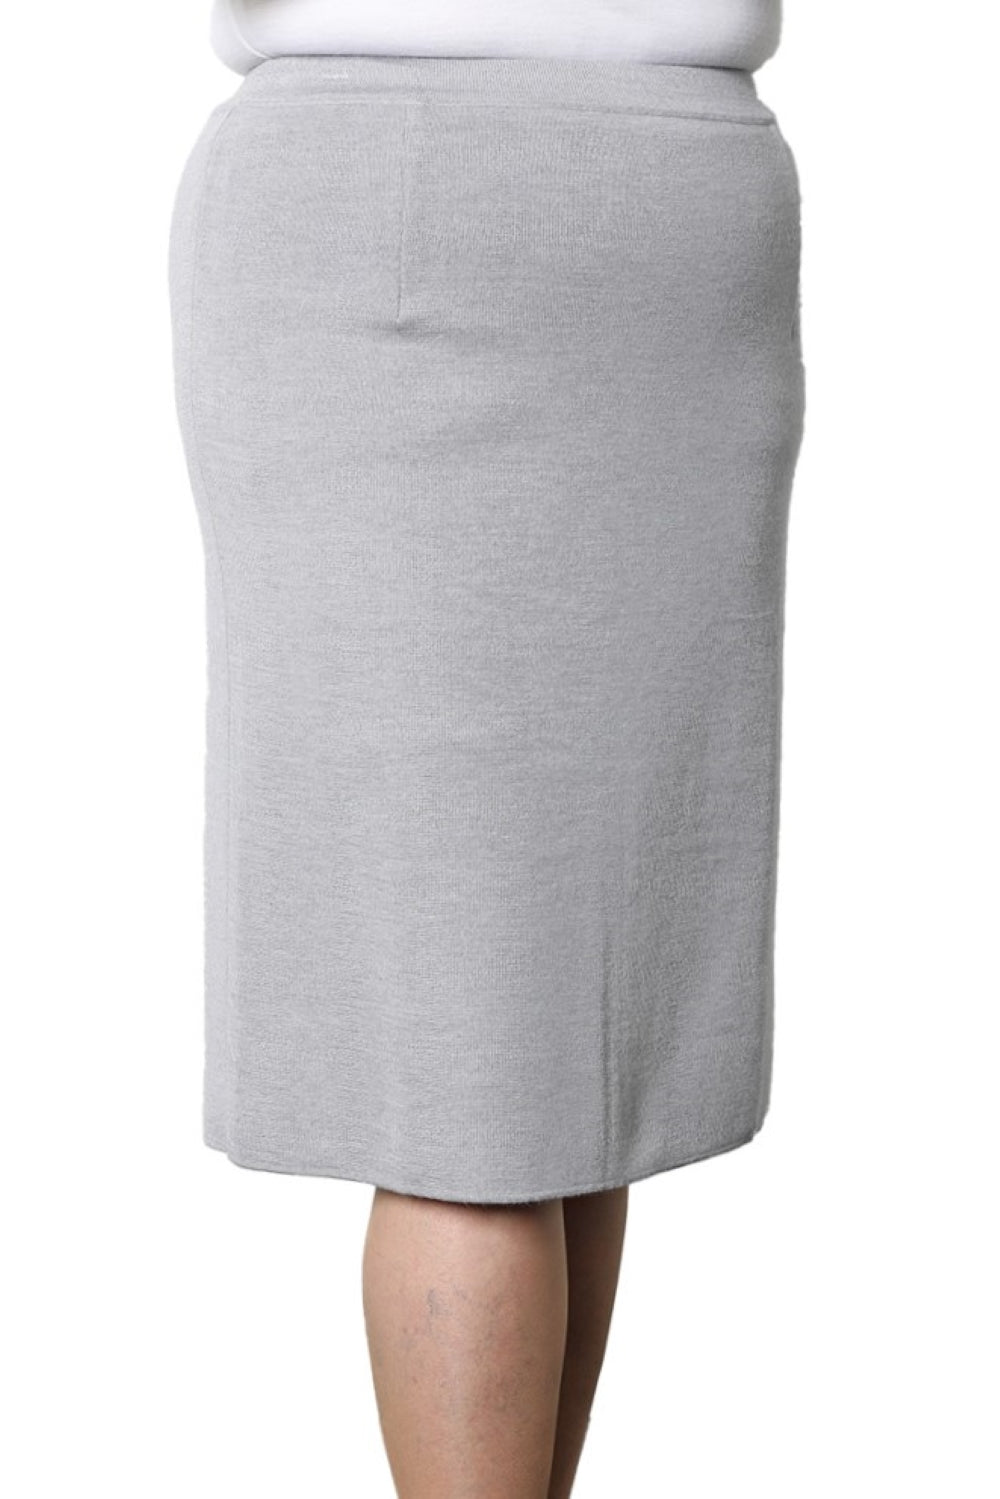 Products Made in Italy - Merino Plain Skirt Silver